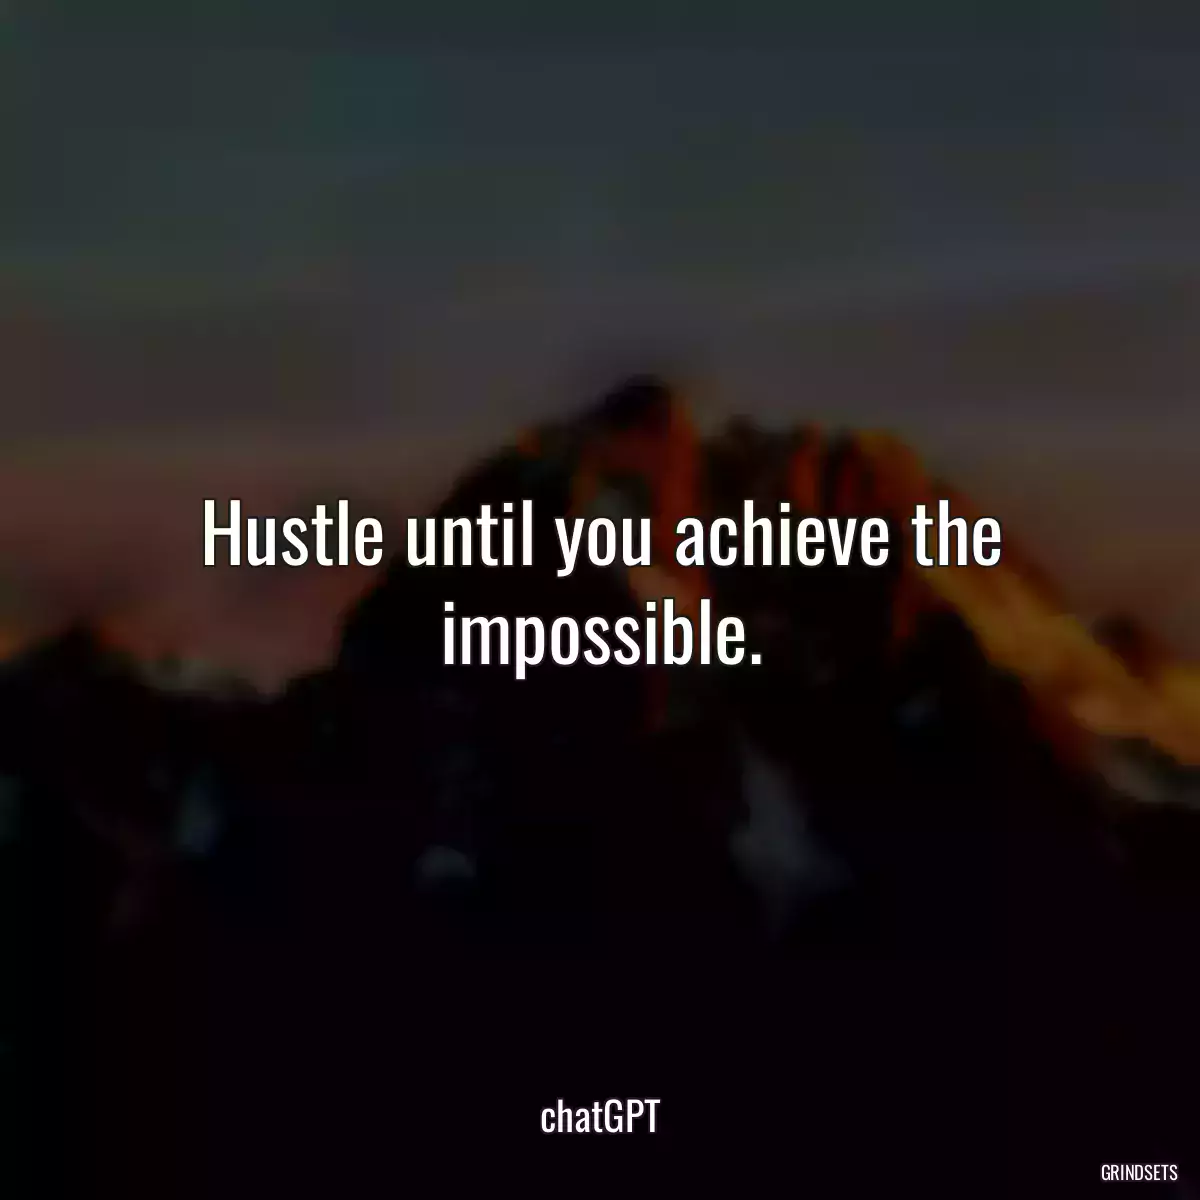 Hustle until you achieve the impossible.